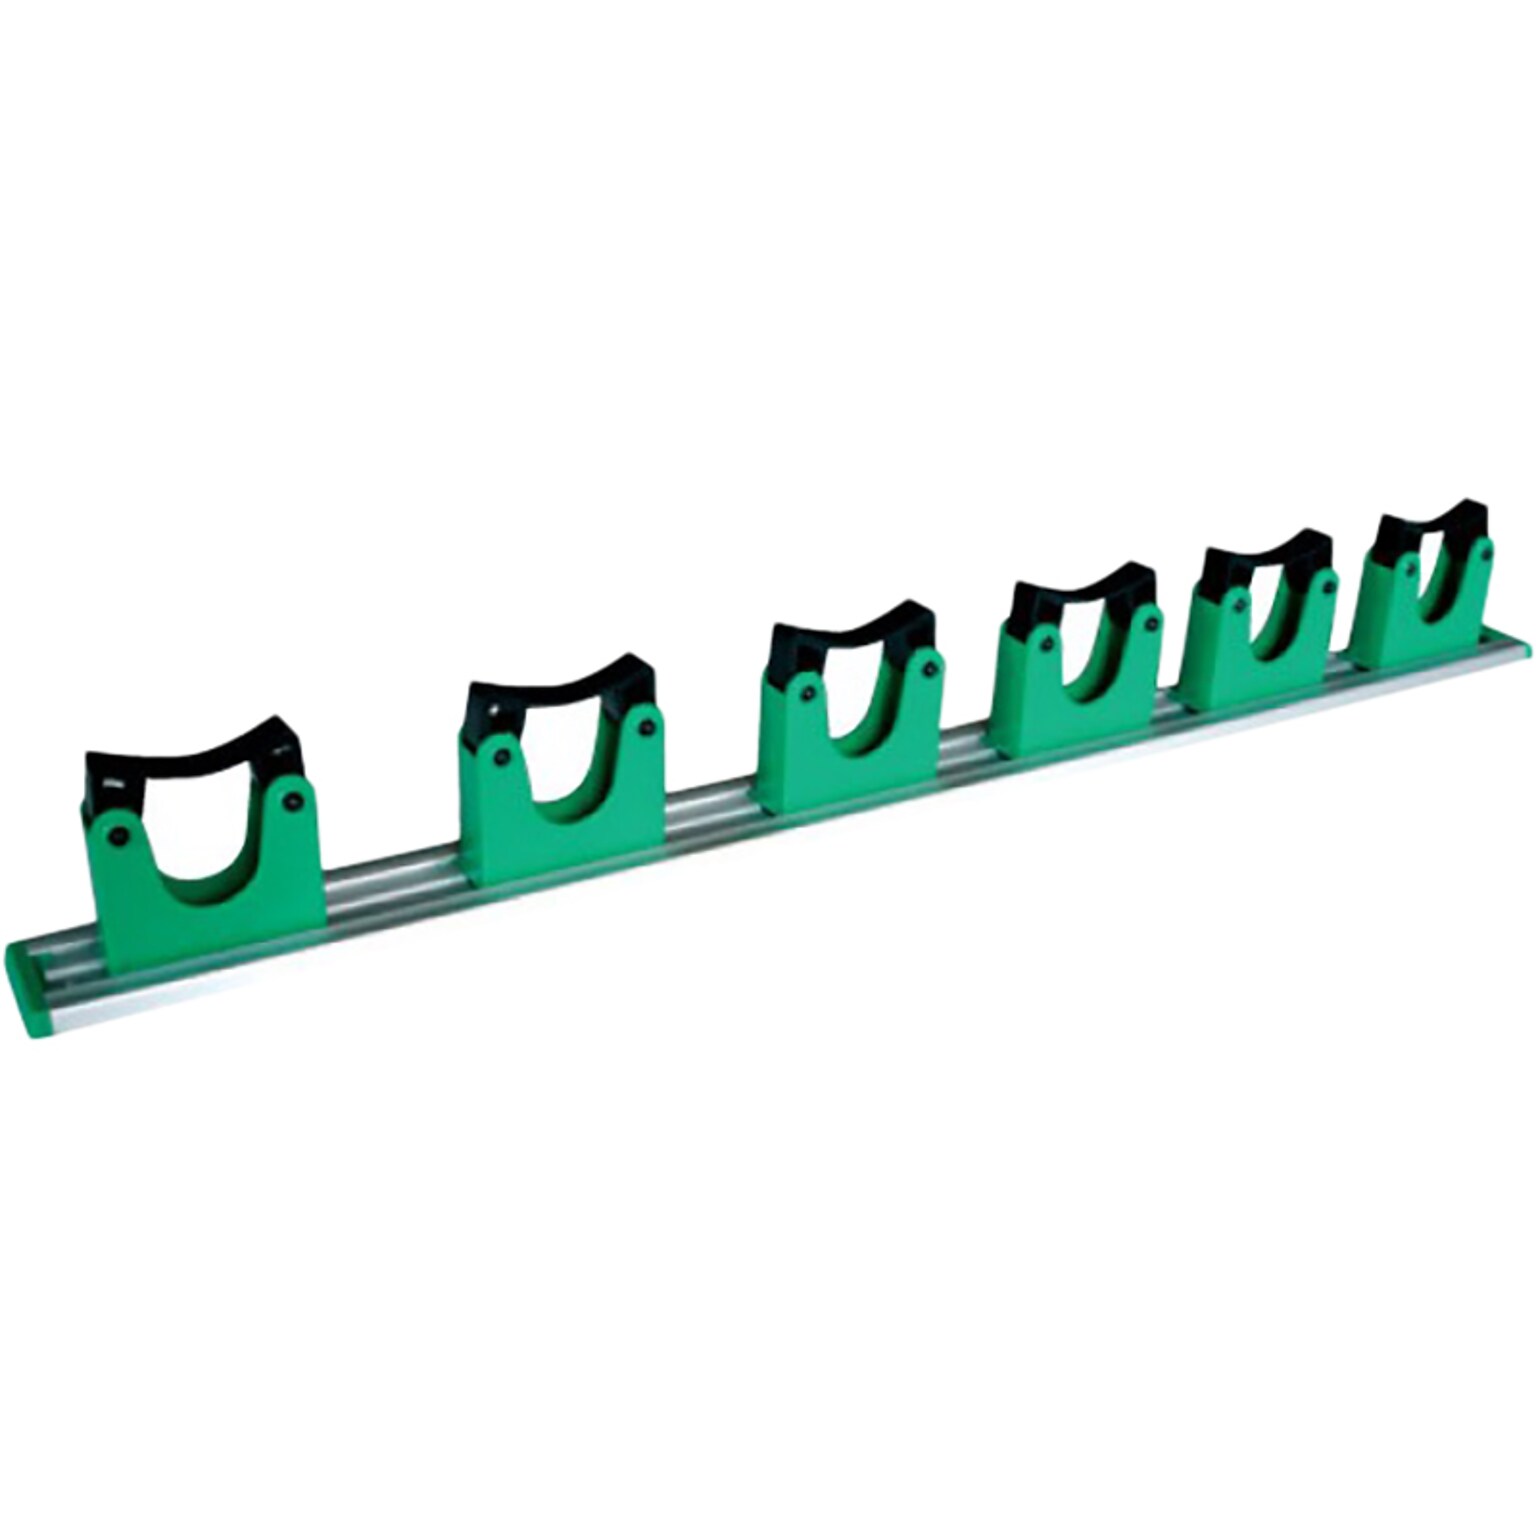 Unger Hang Up 28 Cleaning Tool Holder, Silver/Green (HO700)